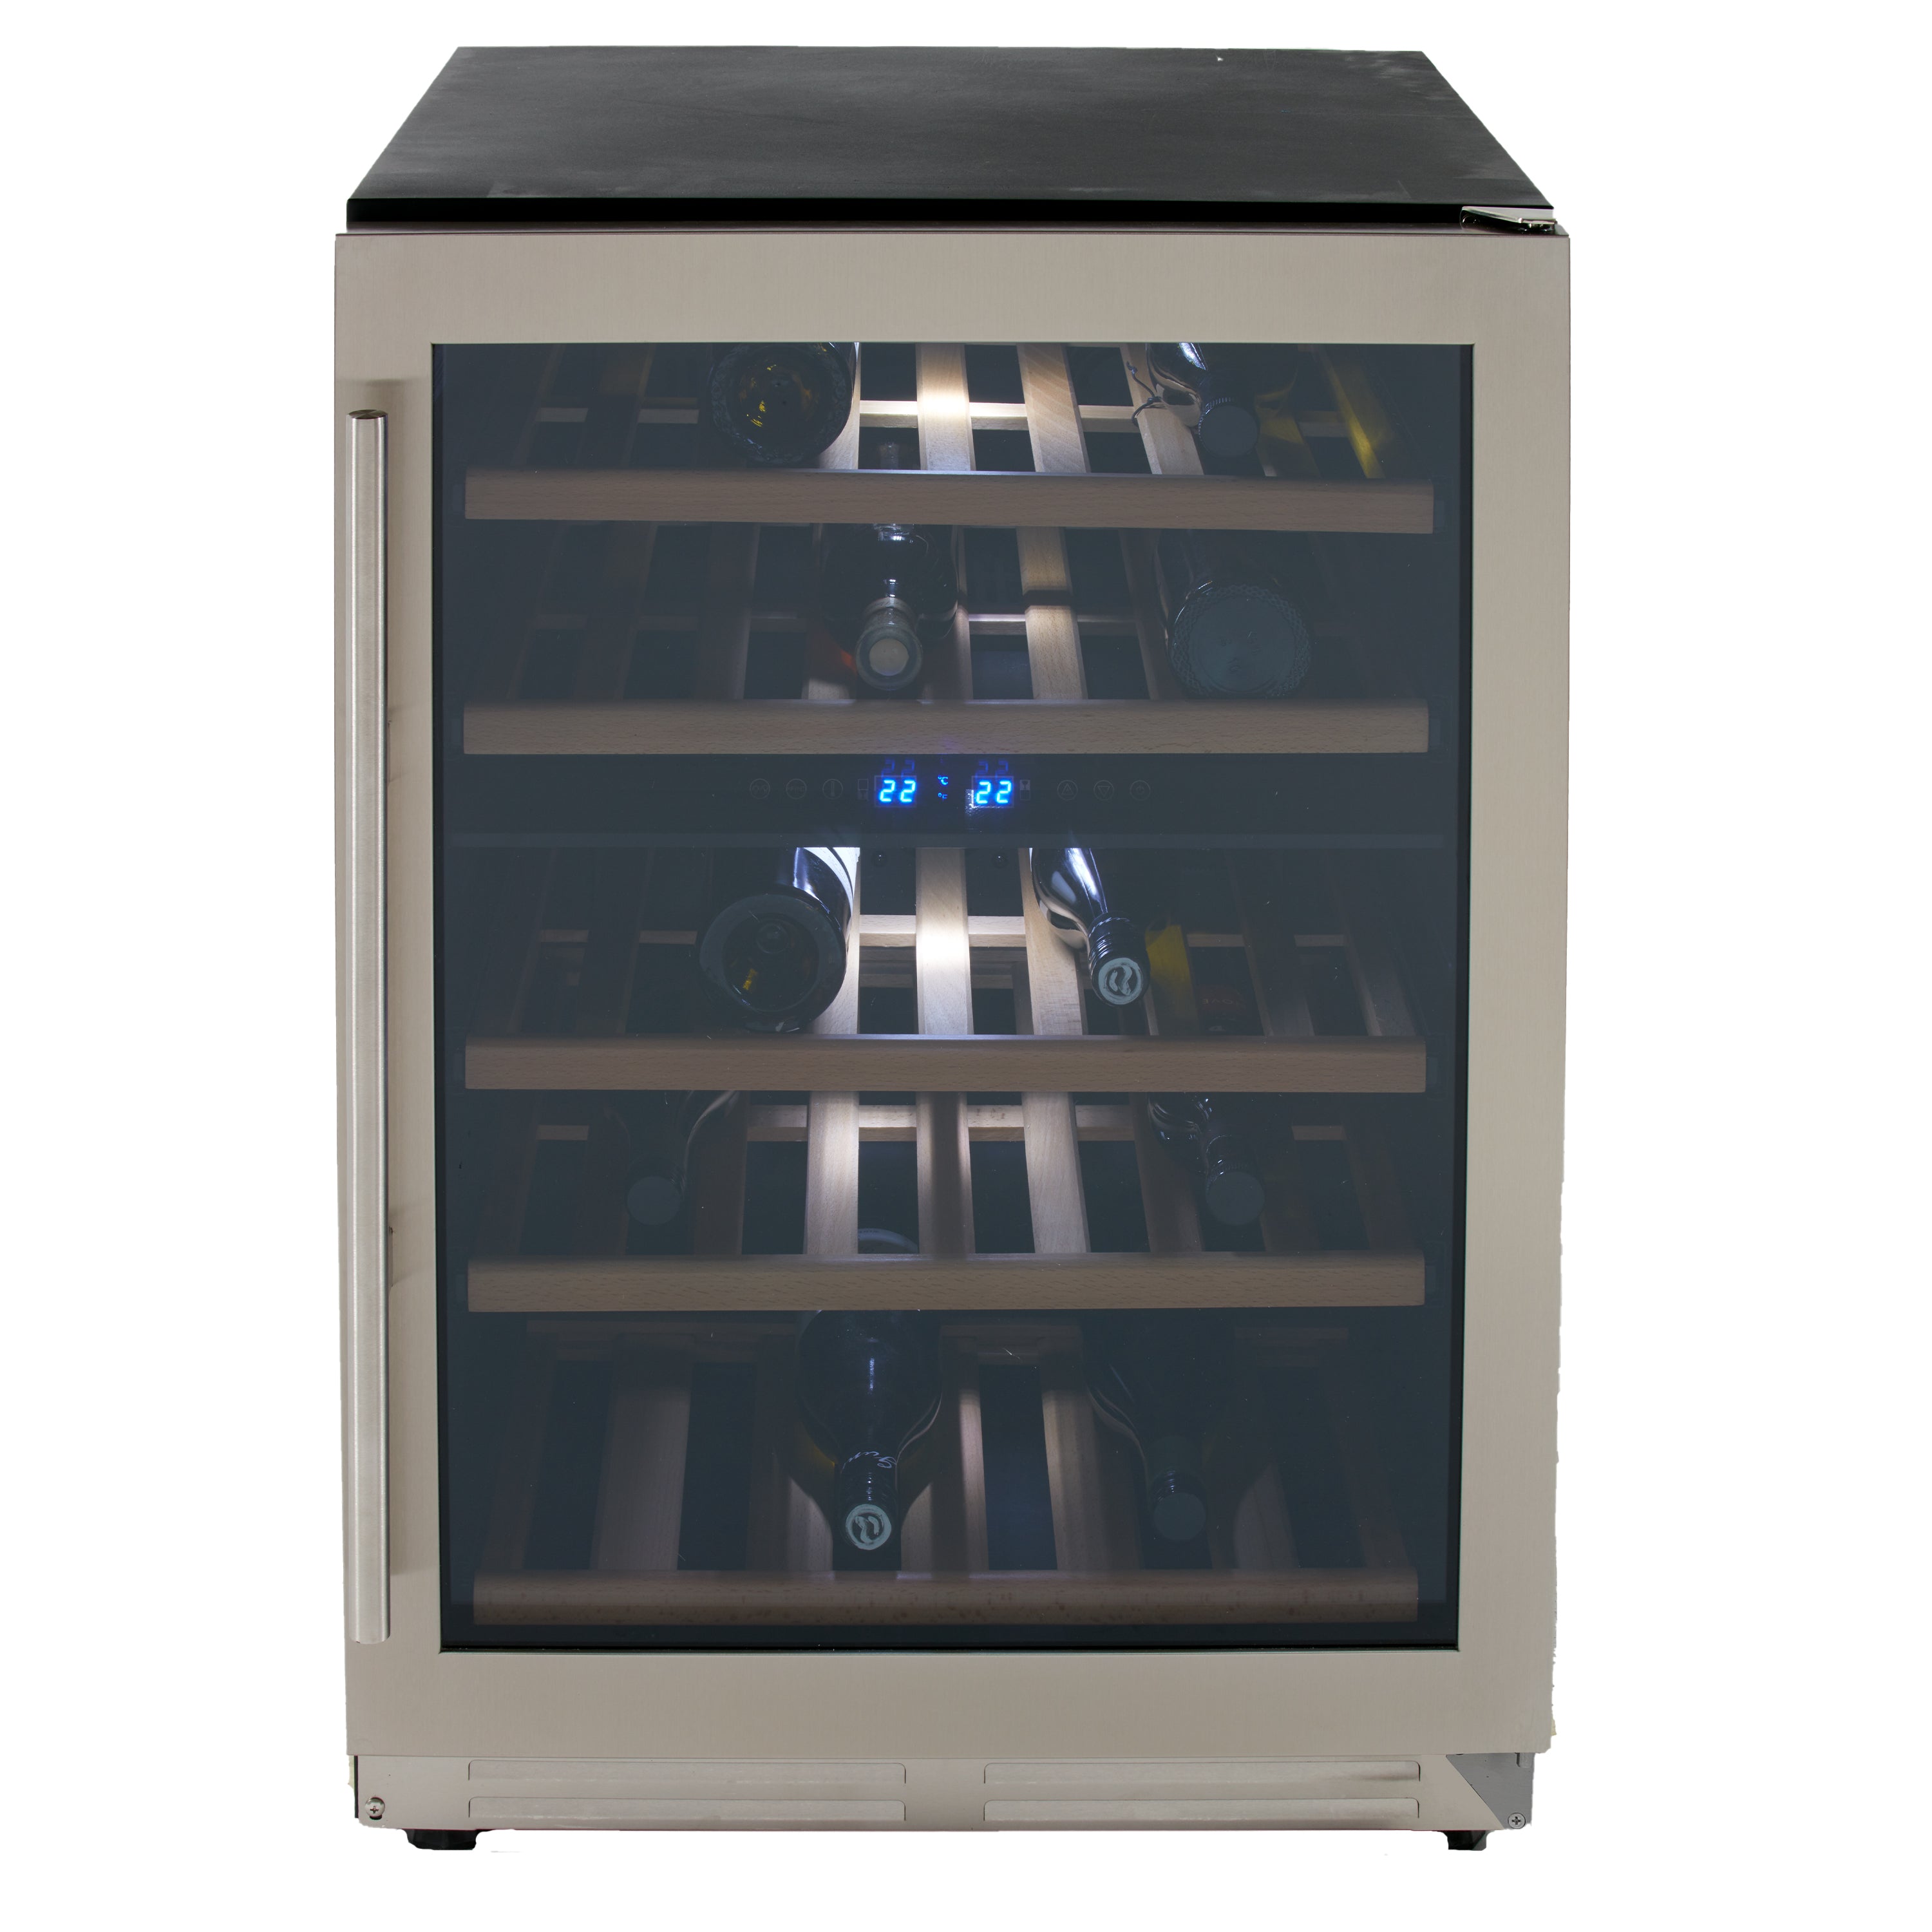 Avanti - WCF43S3SD, Avanti DESIGNER Series Dual-Zone Wine Cooler, 43 Bottle Capacity, in Stainless Steel with Wood Accent Shelving